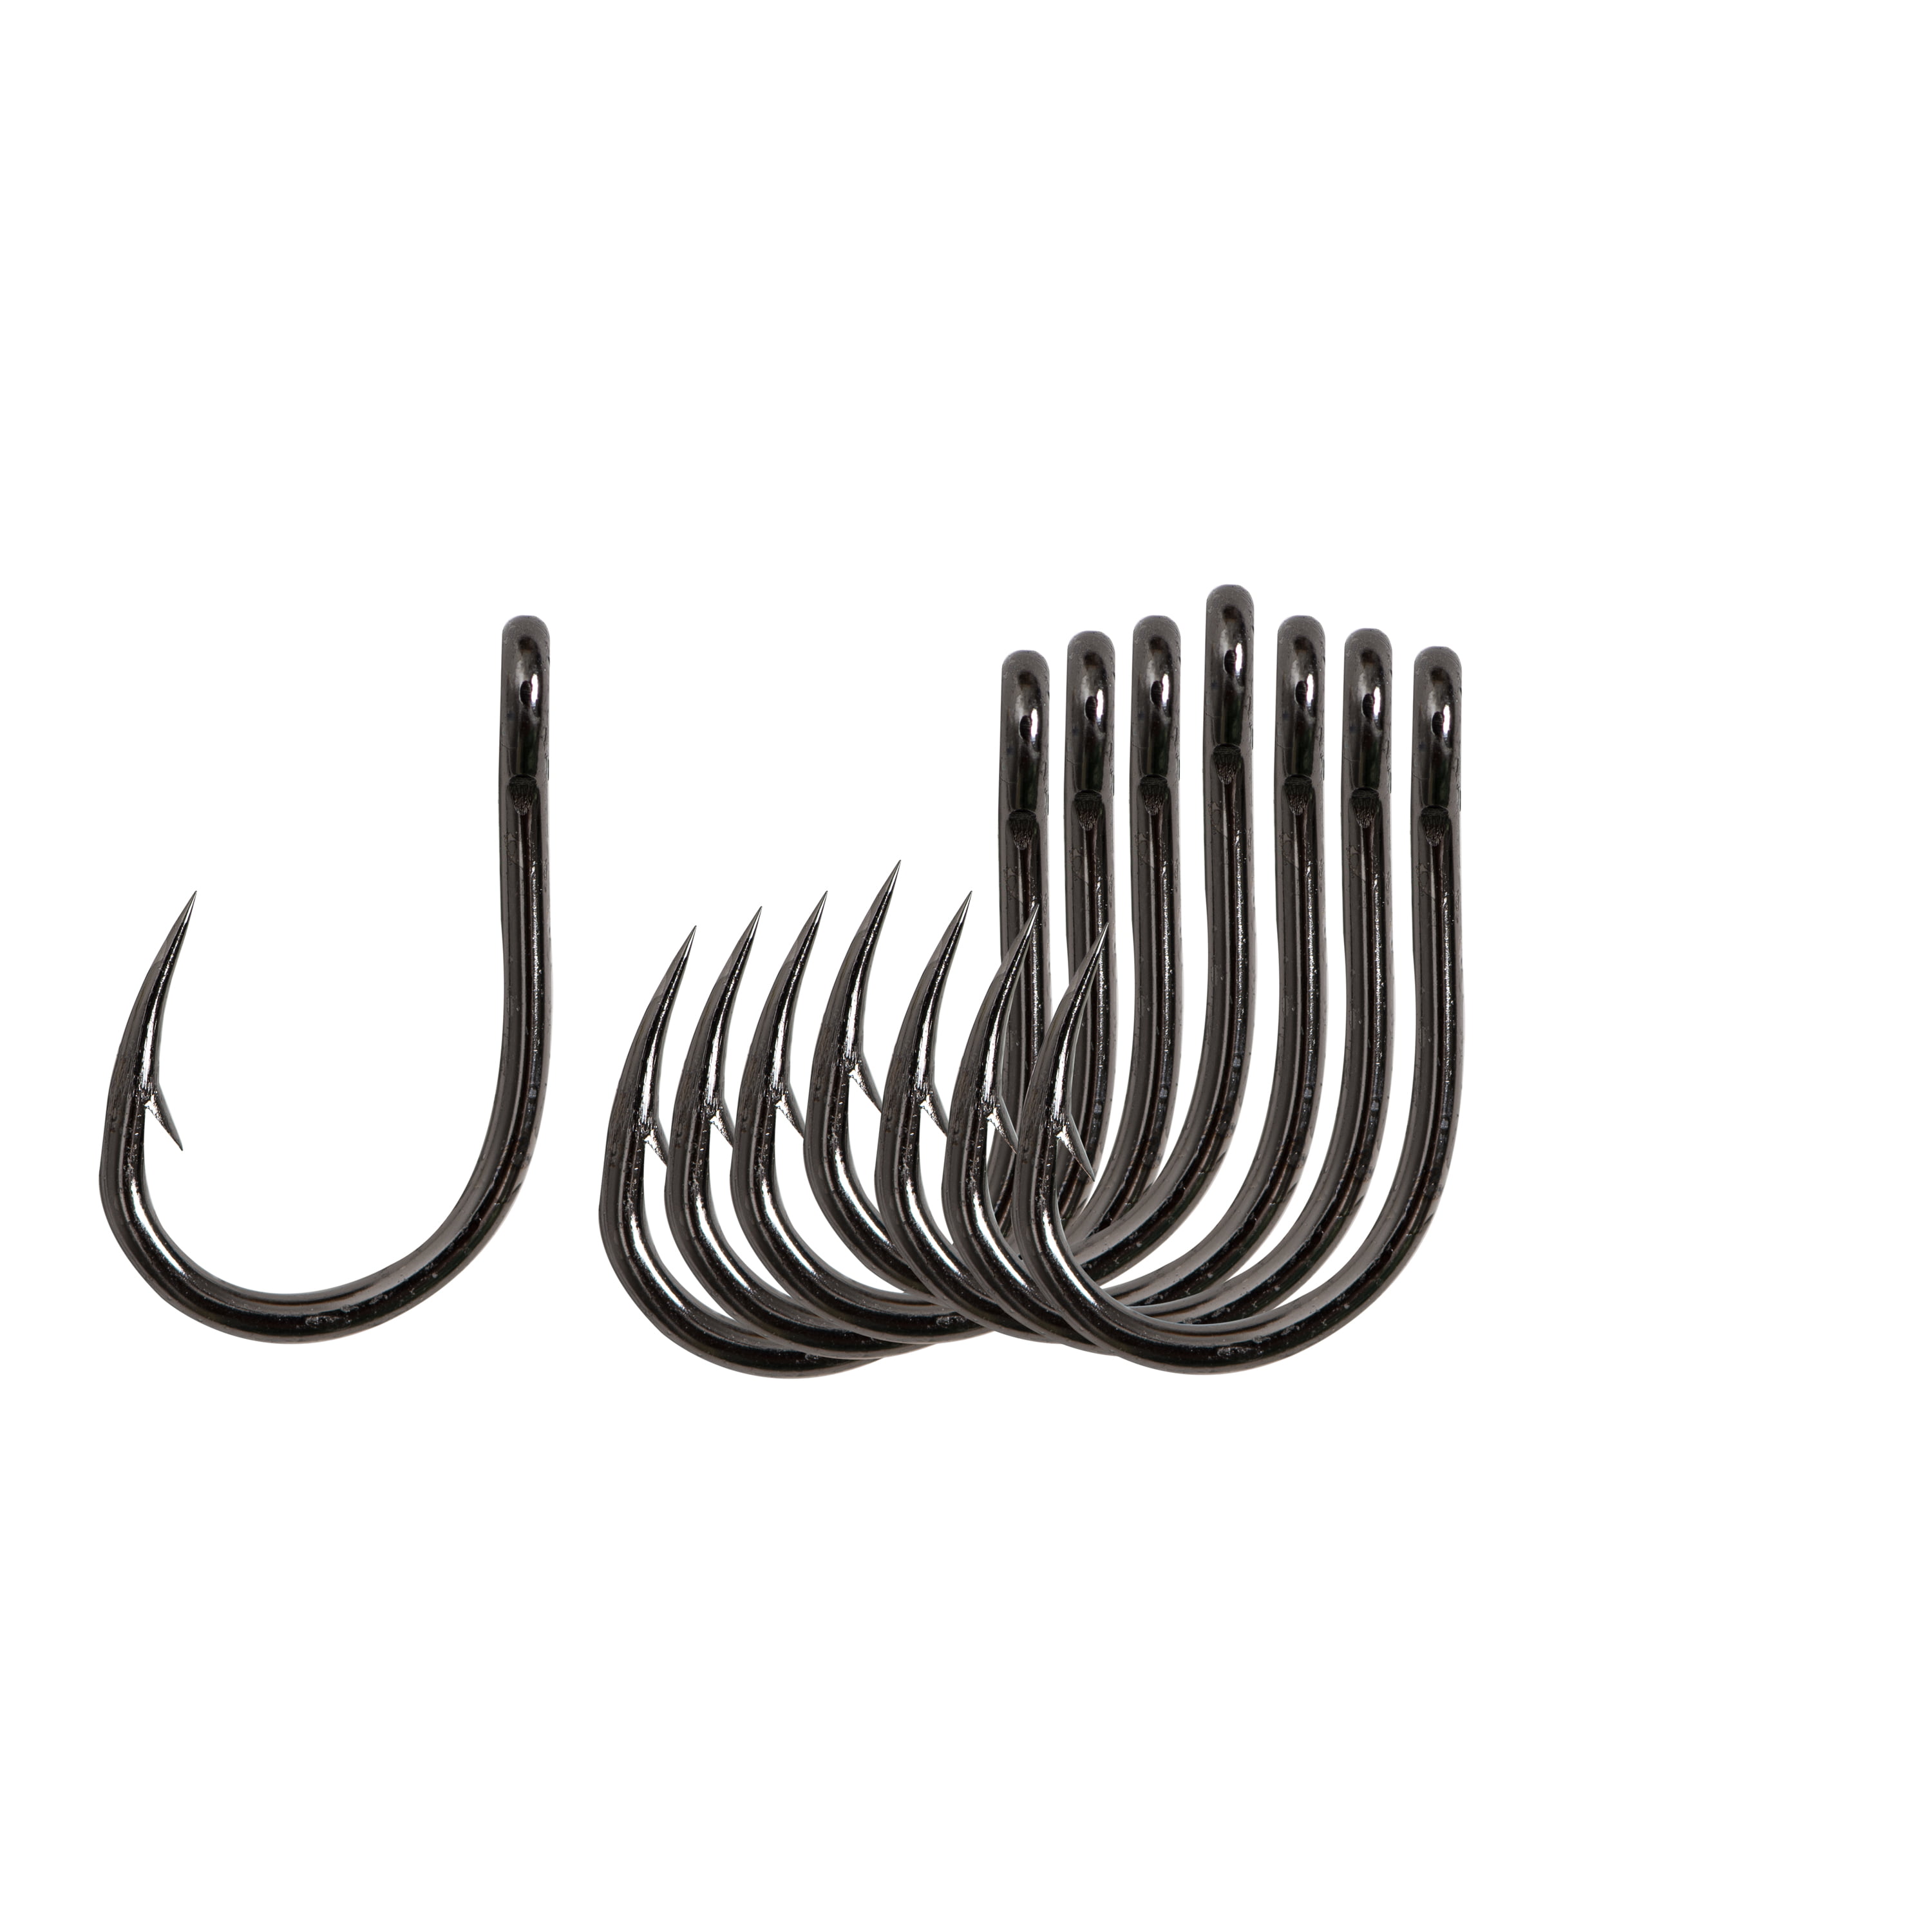  Mustad UltraPoint O'Shaughnessy Live Bait 3 Extra